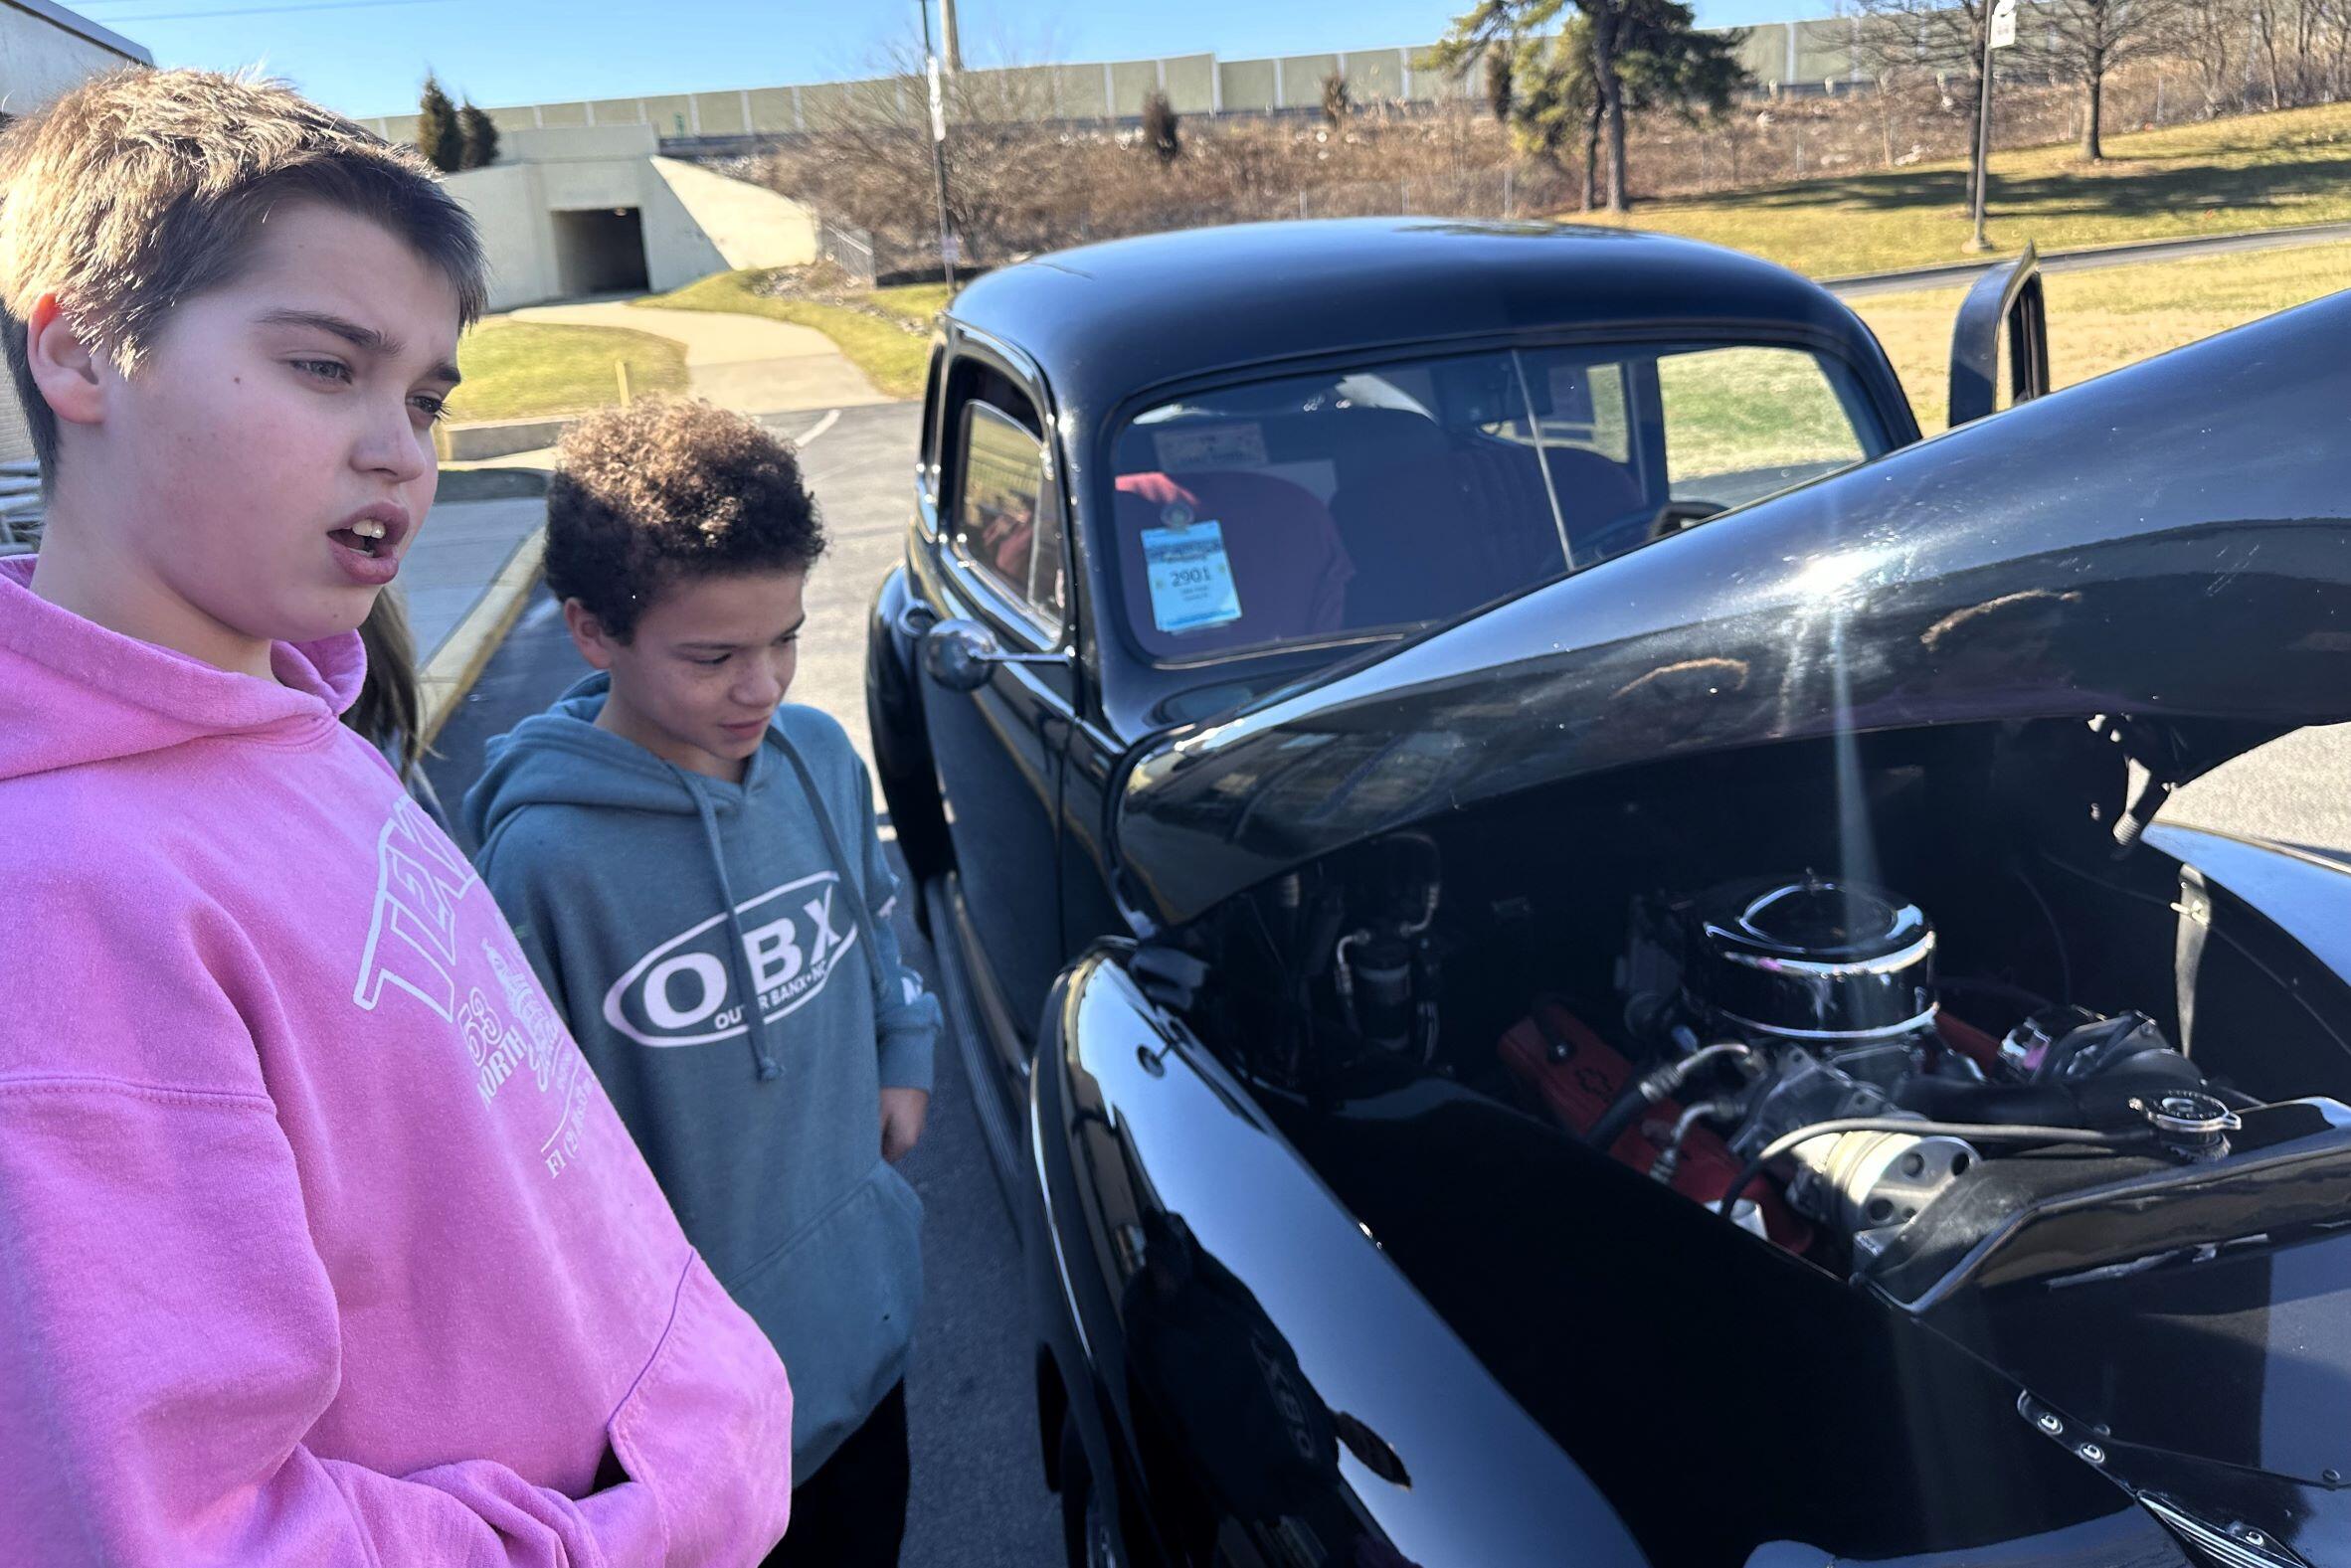 Two Students looking at an antique car. Car has hood open.